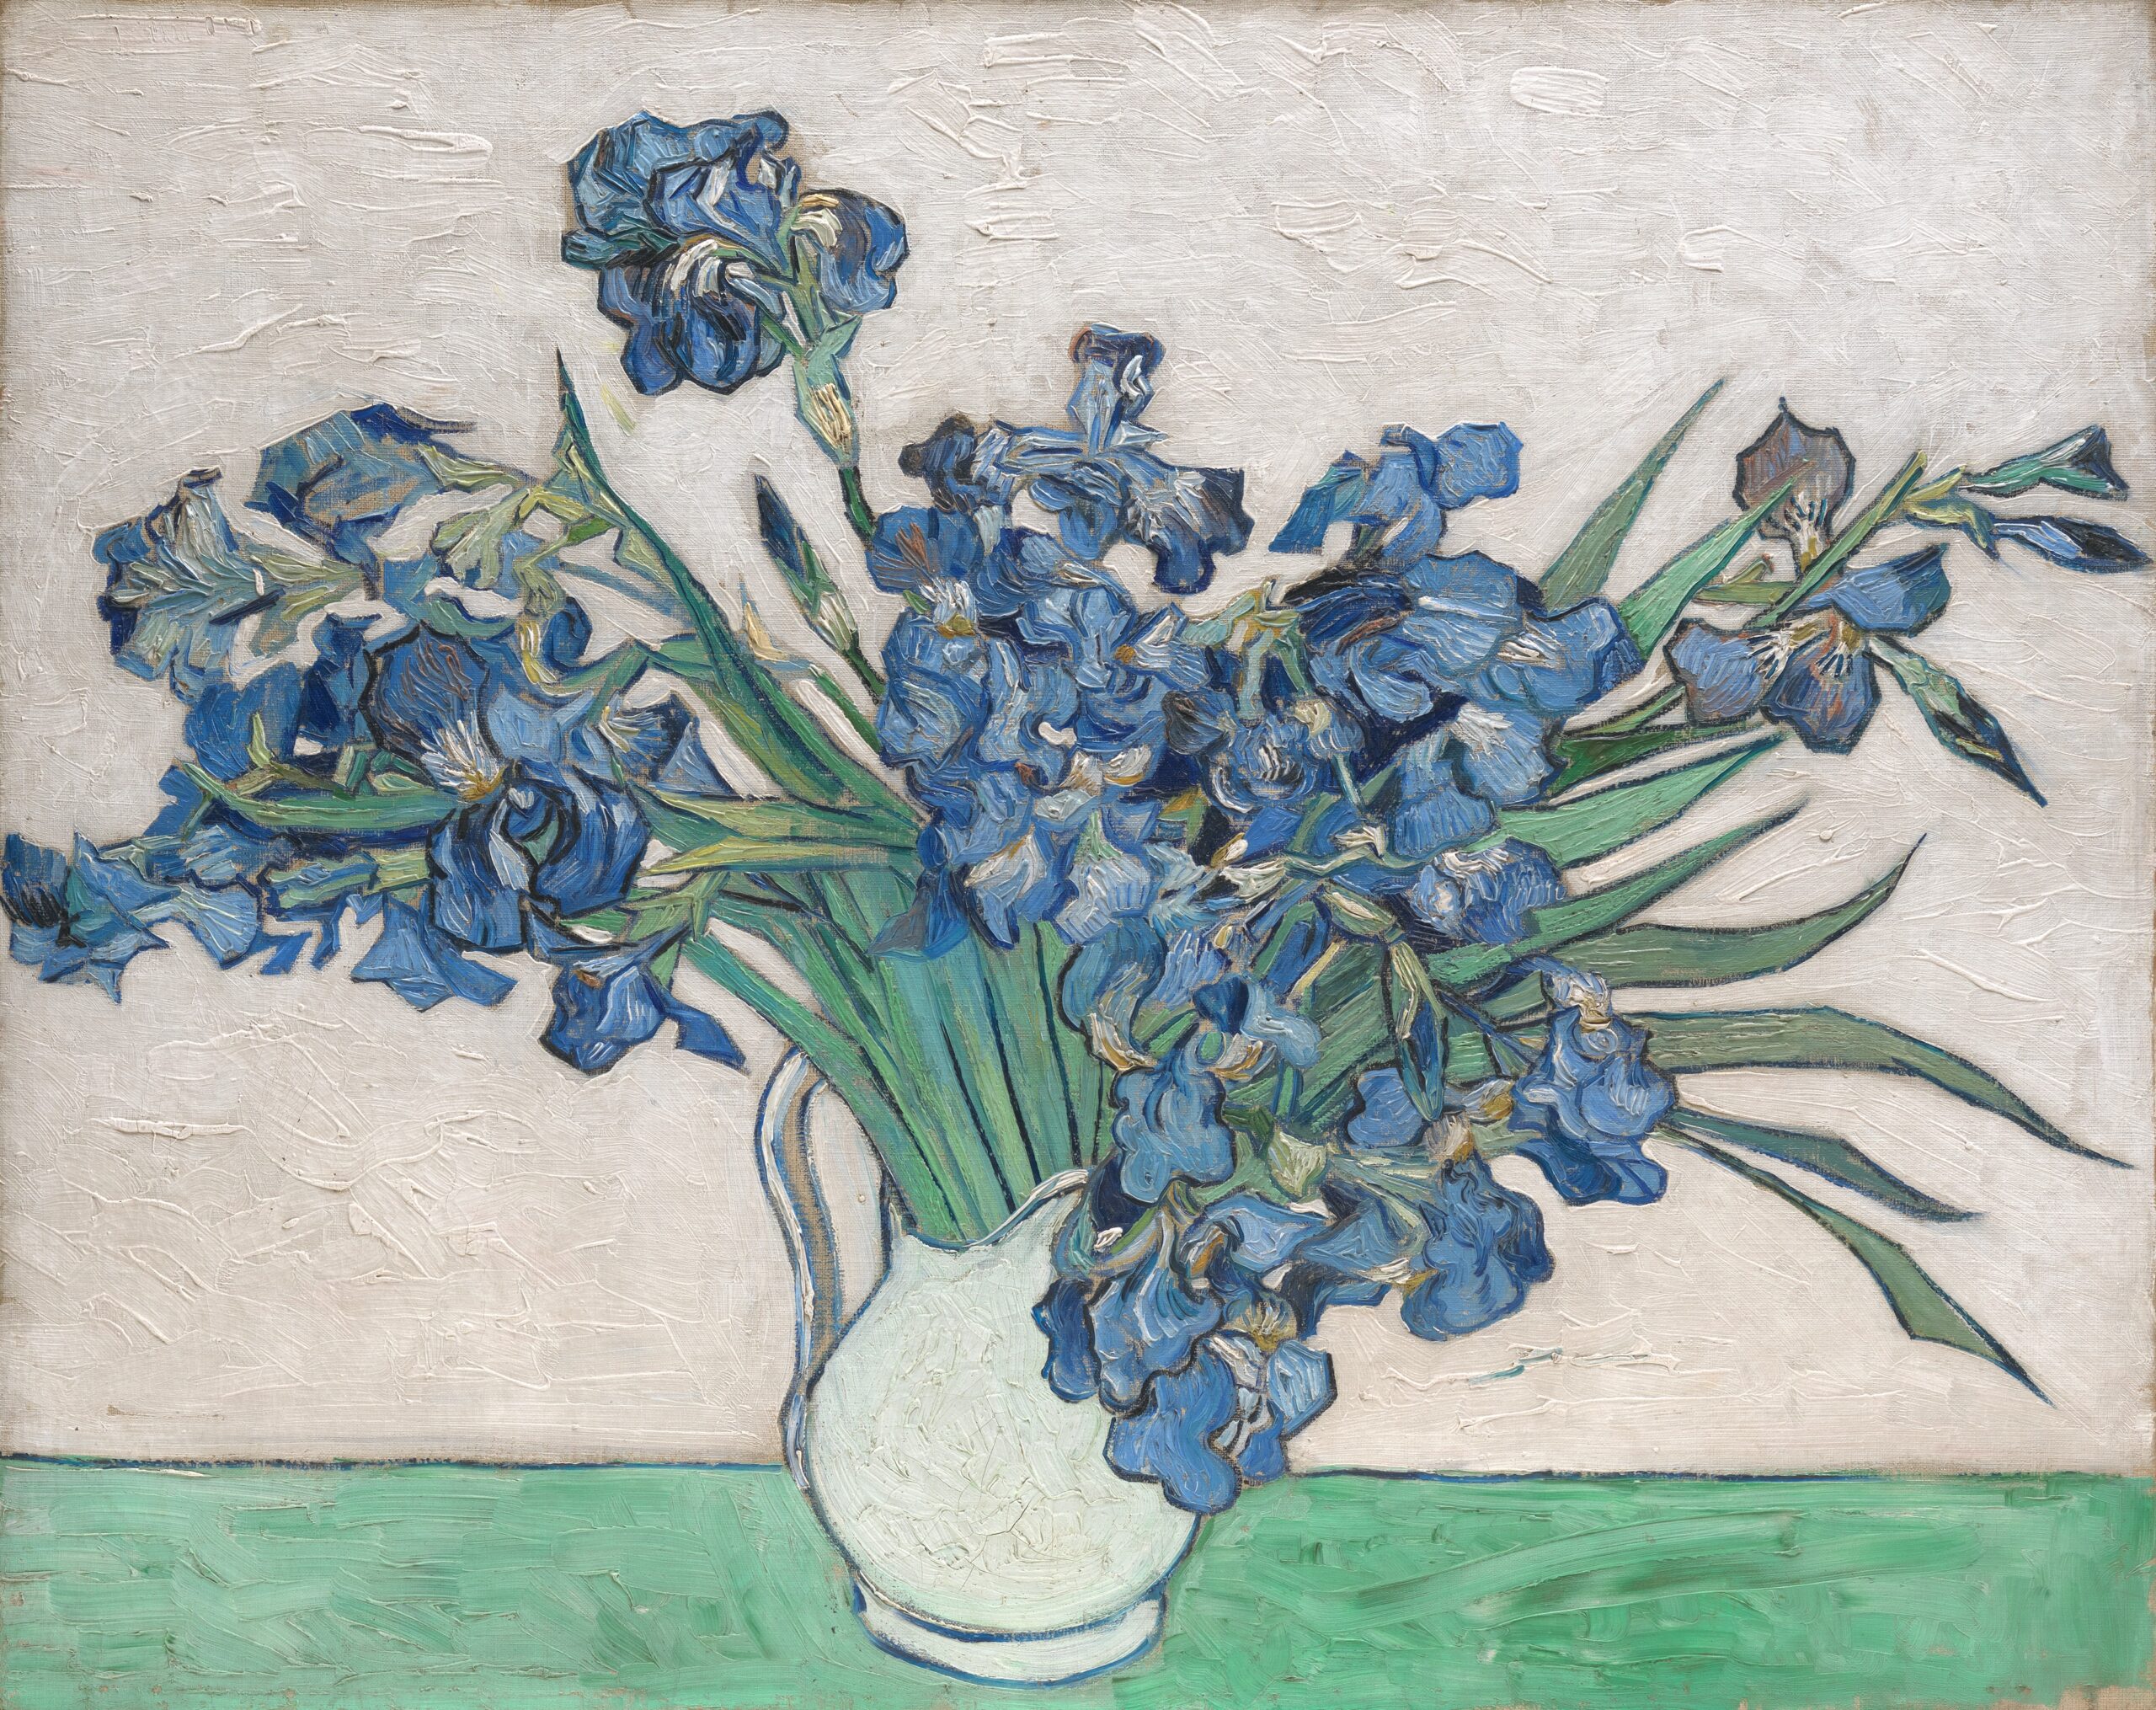 Vincent van Gogh (Dutch, Zundert 1853–1890 Auvers-sur-Oise)
Irises, 1890
Oil on canvas; 29 x 36 1/4 in. (73.7 x 92.1 cm)
The Metropolitan Museum of Art, New York, Gift of Adele R. Levy, 1958 (58.187)
http://www.metmuseum.org/Collections/search-the-collections/436528